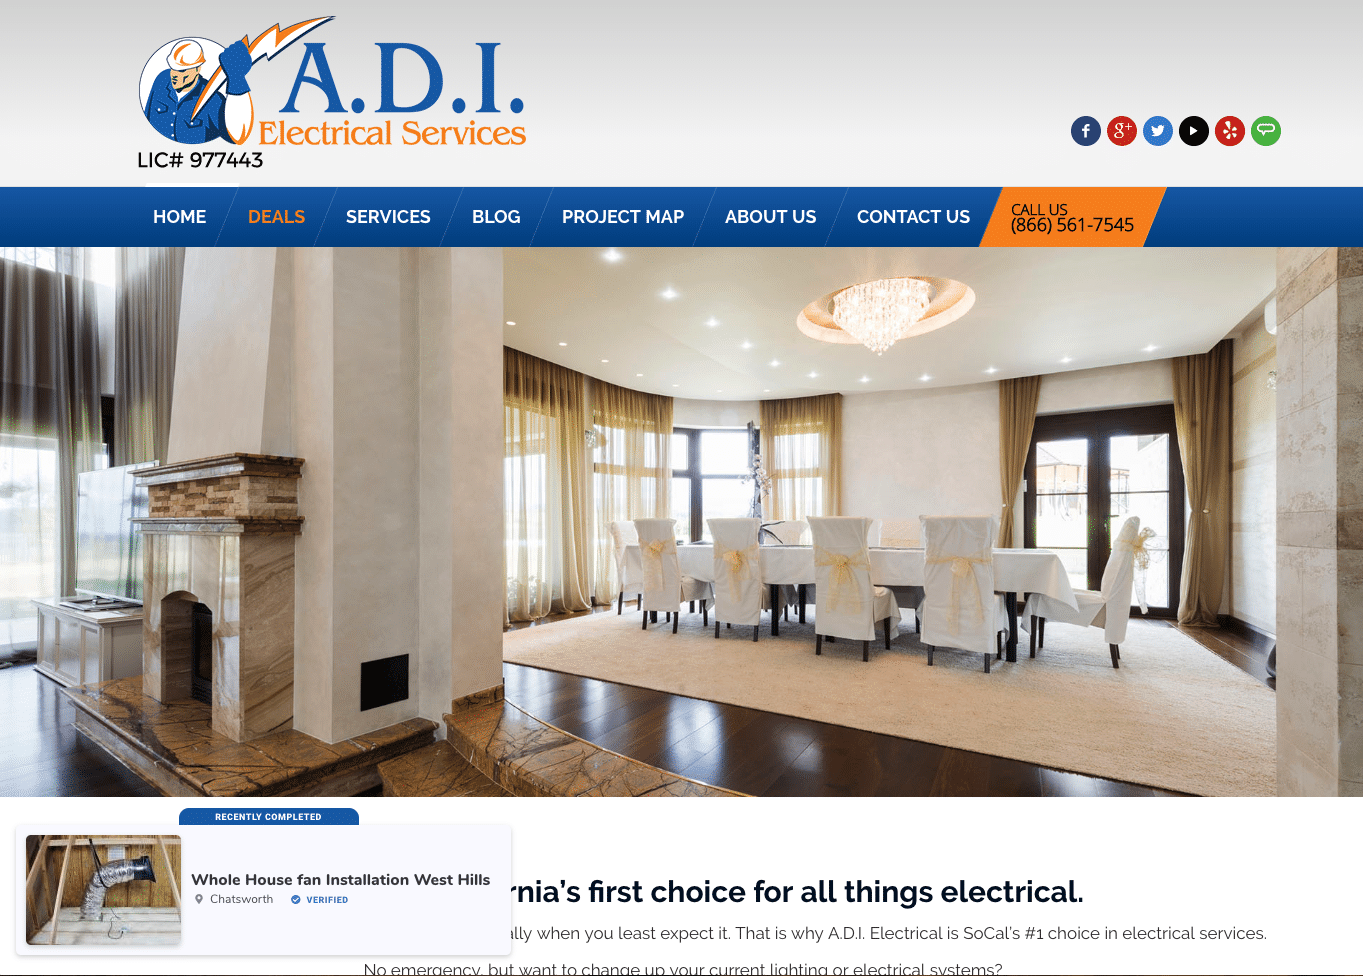 A.D.I. Electrical Services